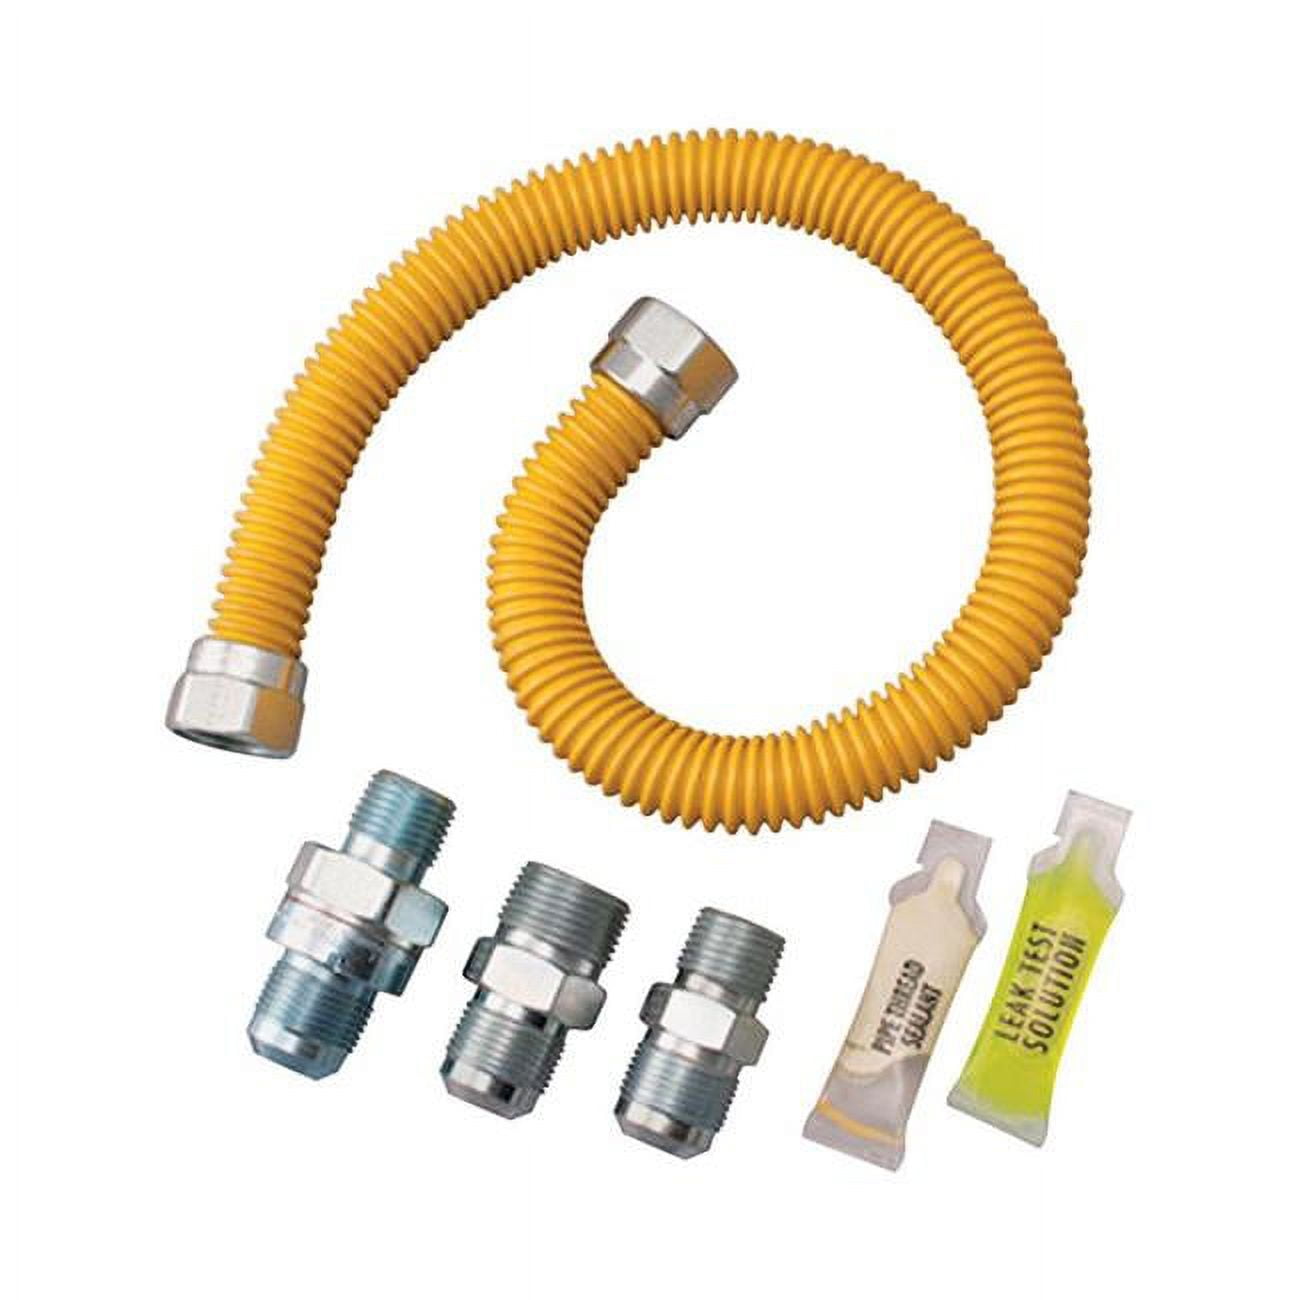 Stainless Steel Gas Appliance Connector Kit, 0.5 x 60 x 0.5 in. Dia. OD -  Dormont, DO6756